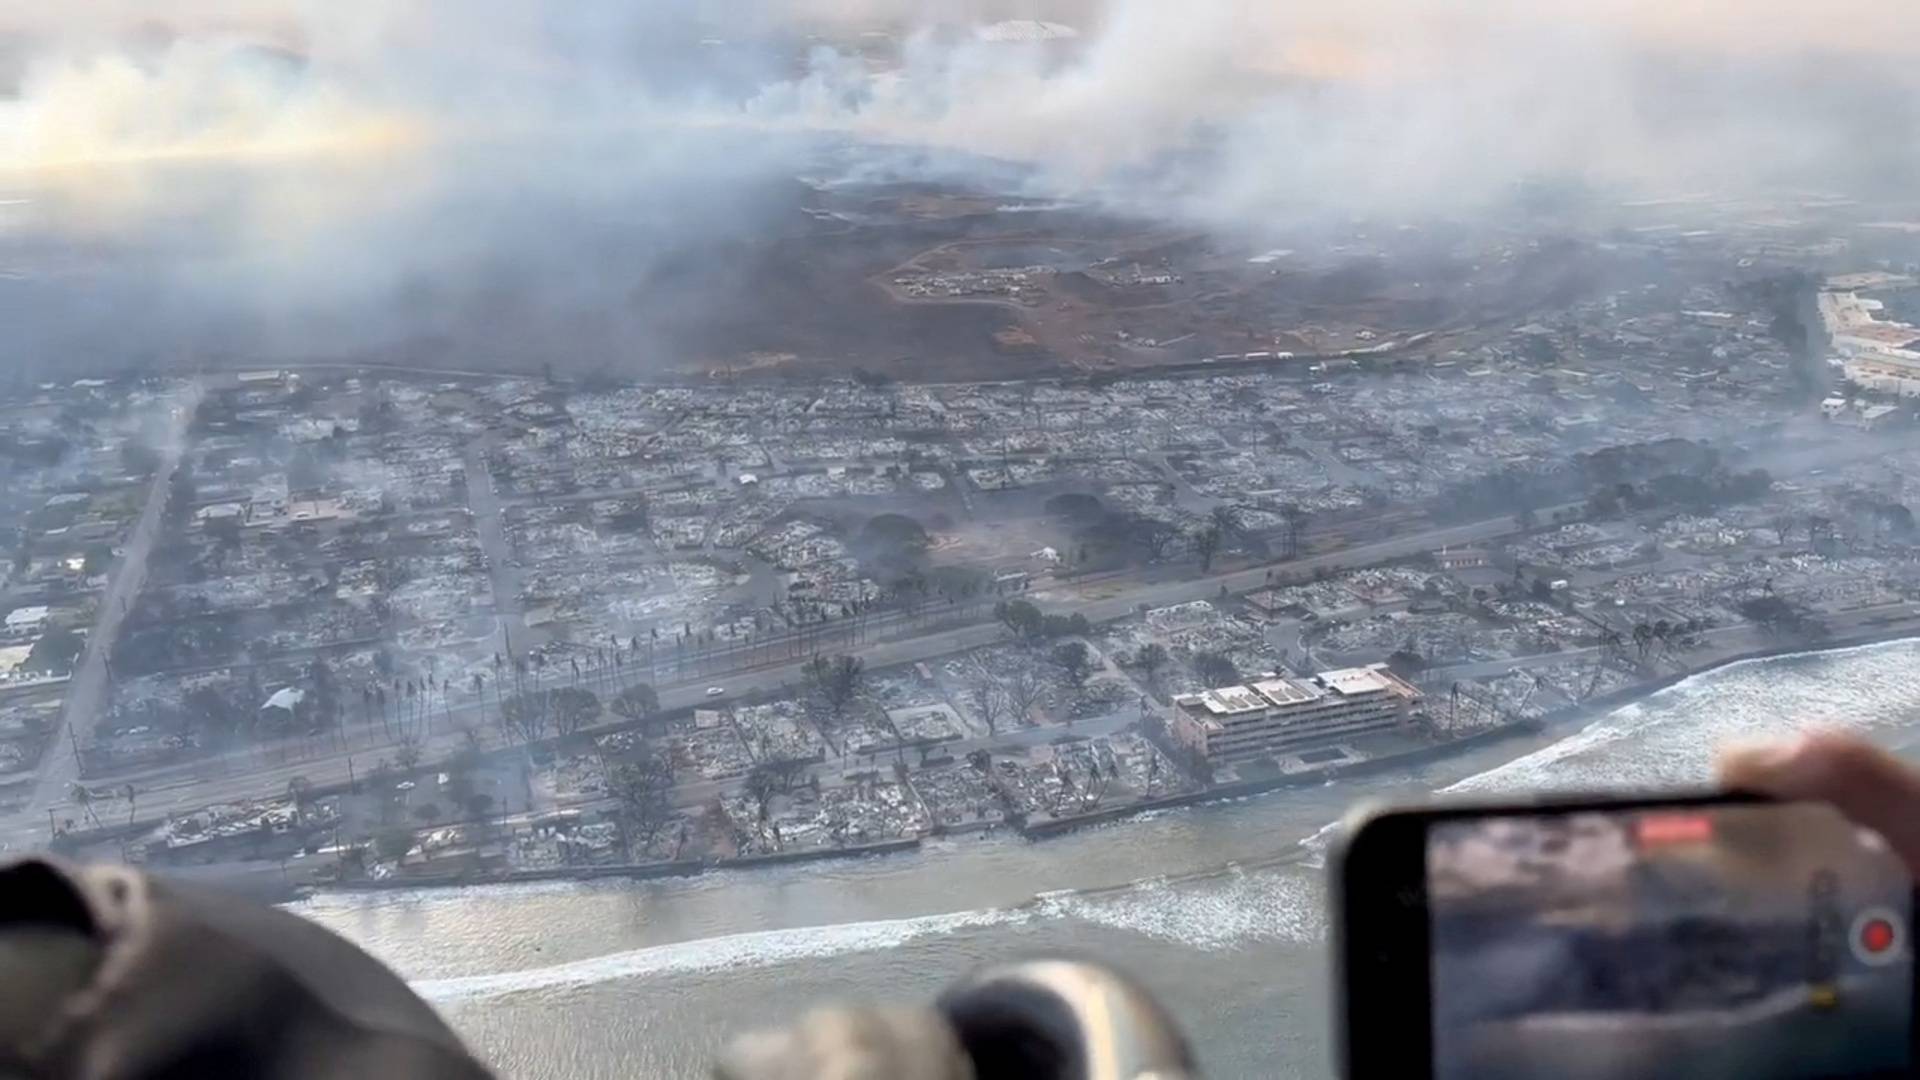 Aerial views of Lahaina coast in the aftermath of wildfires